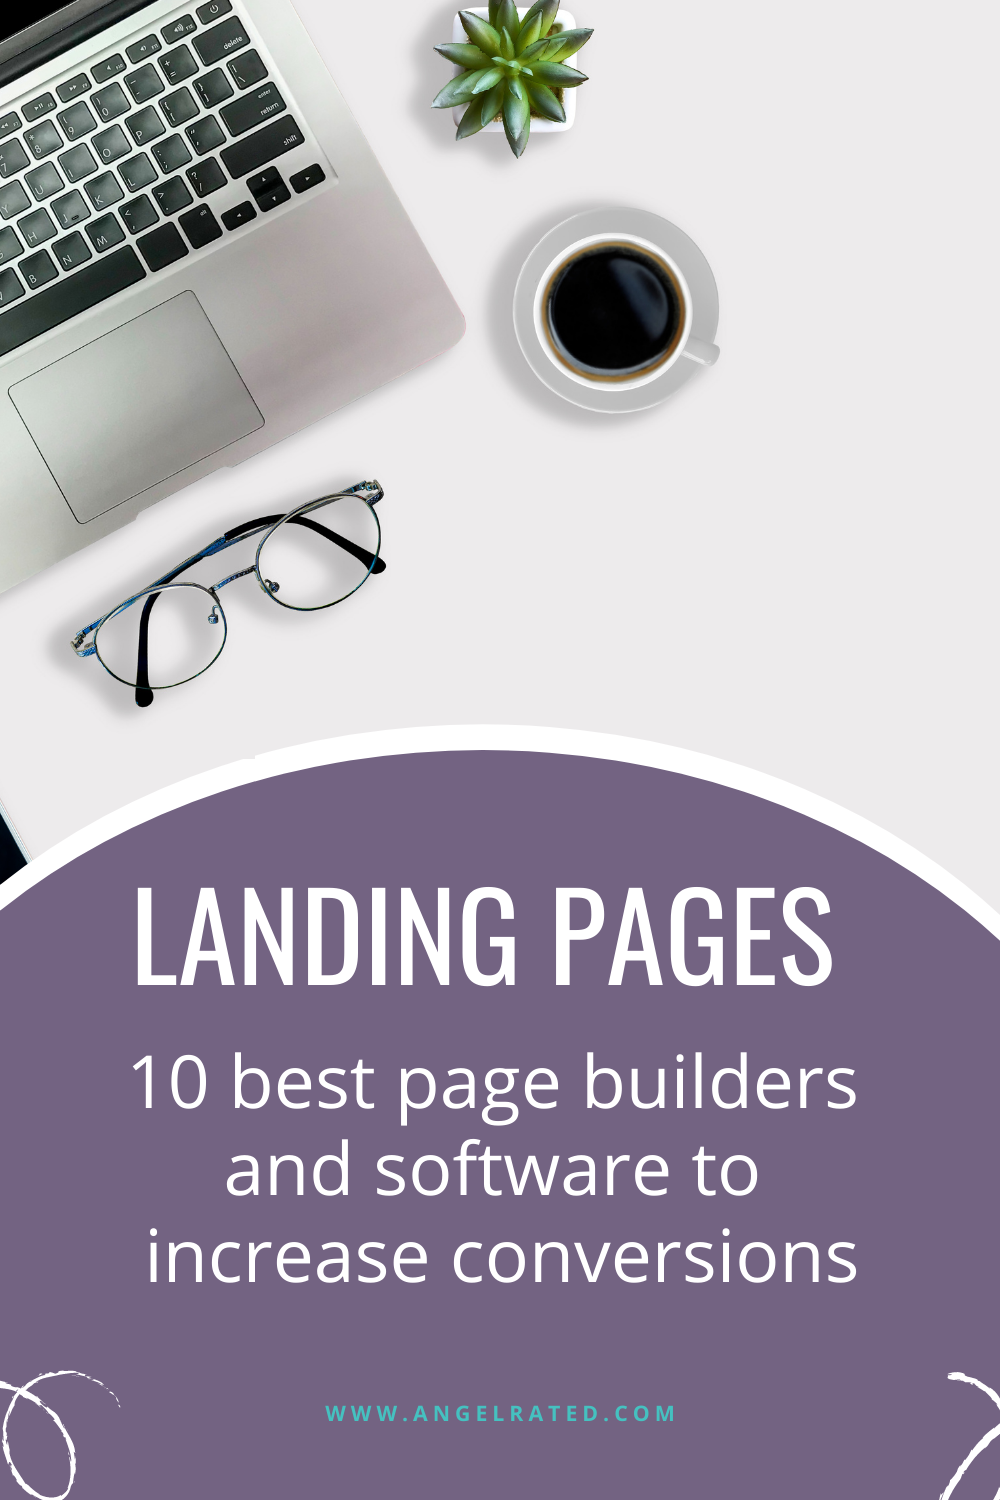 10 Landing Page Builders to Increase Conversions